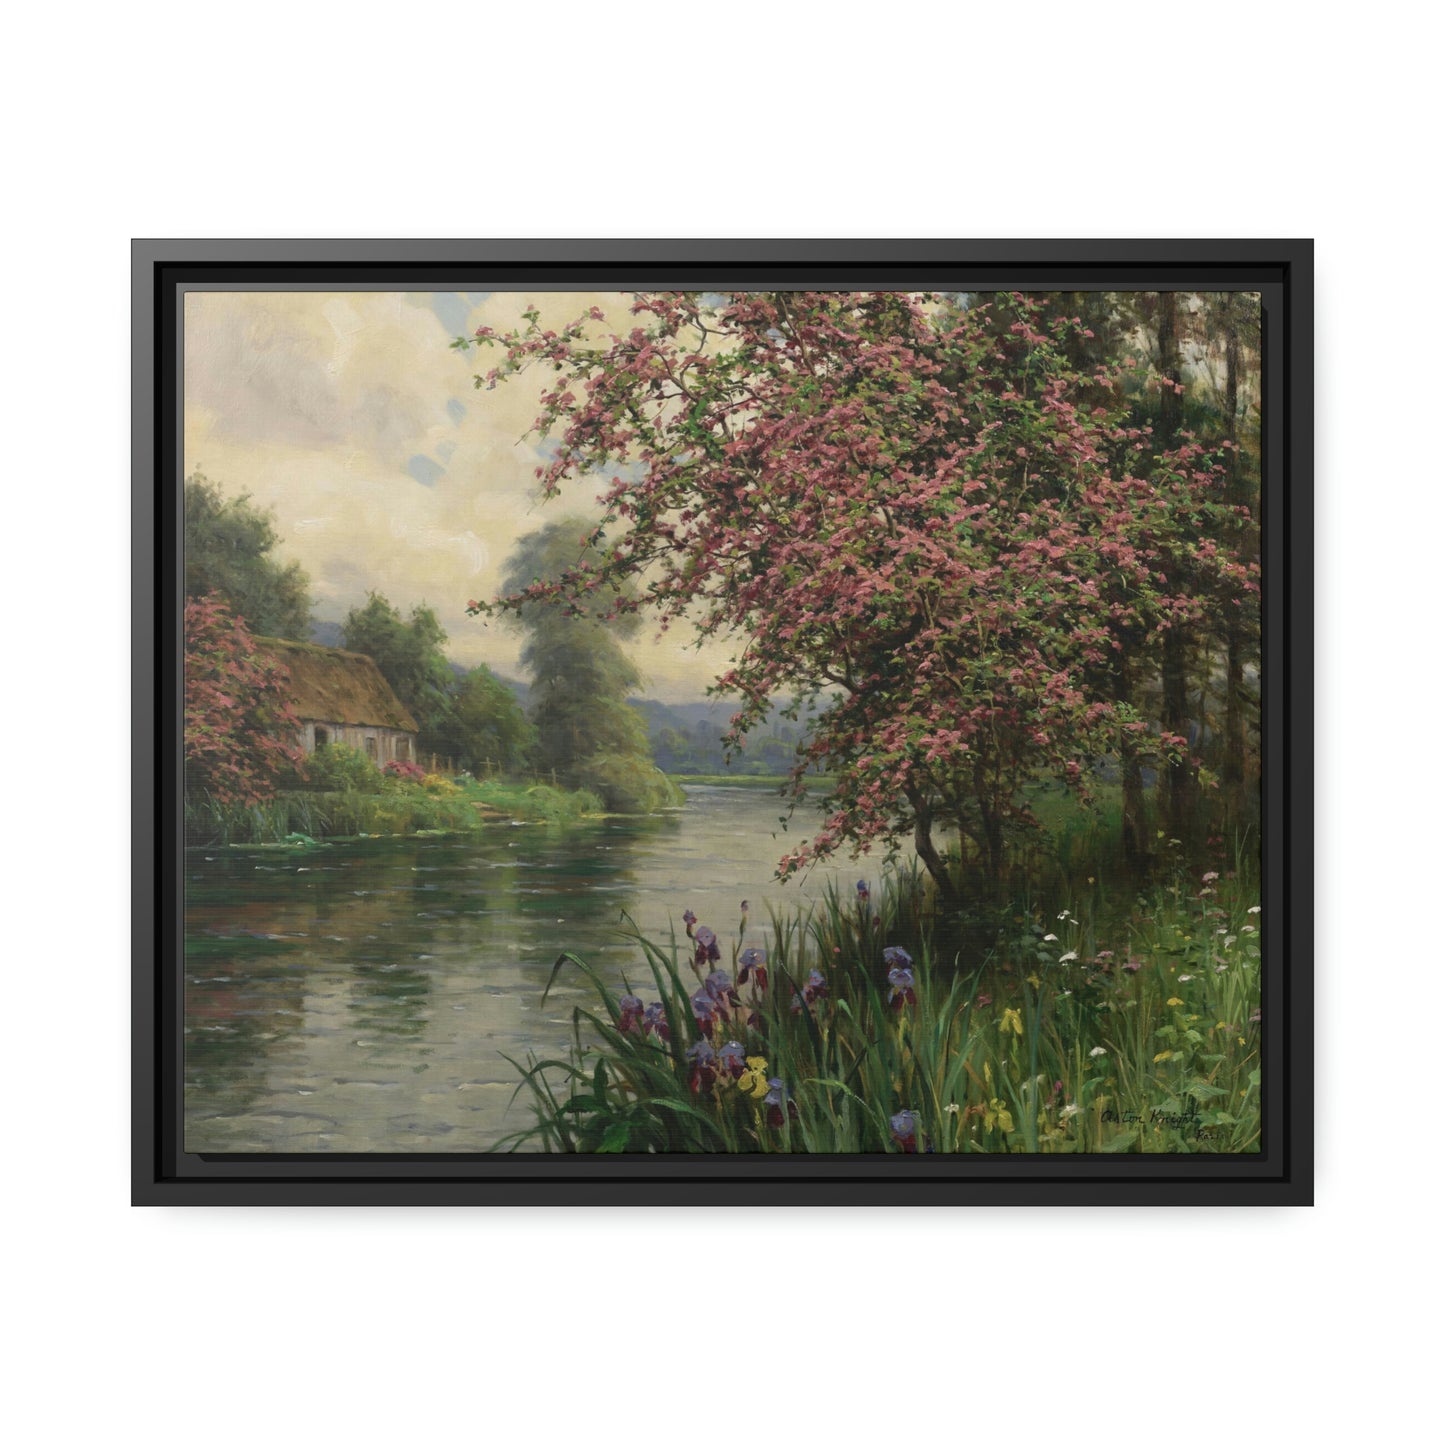 Louis Aston Knight: "Summer Along the River" - Framed Canvas Reproduction